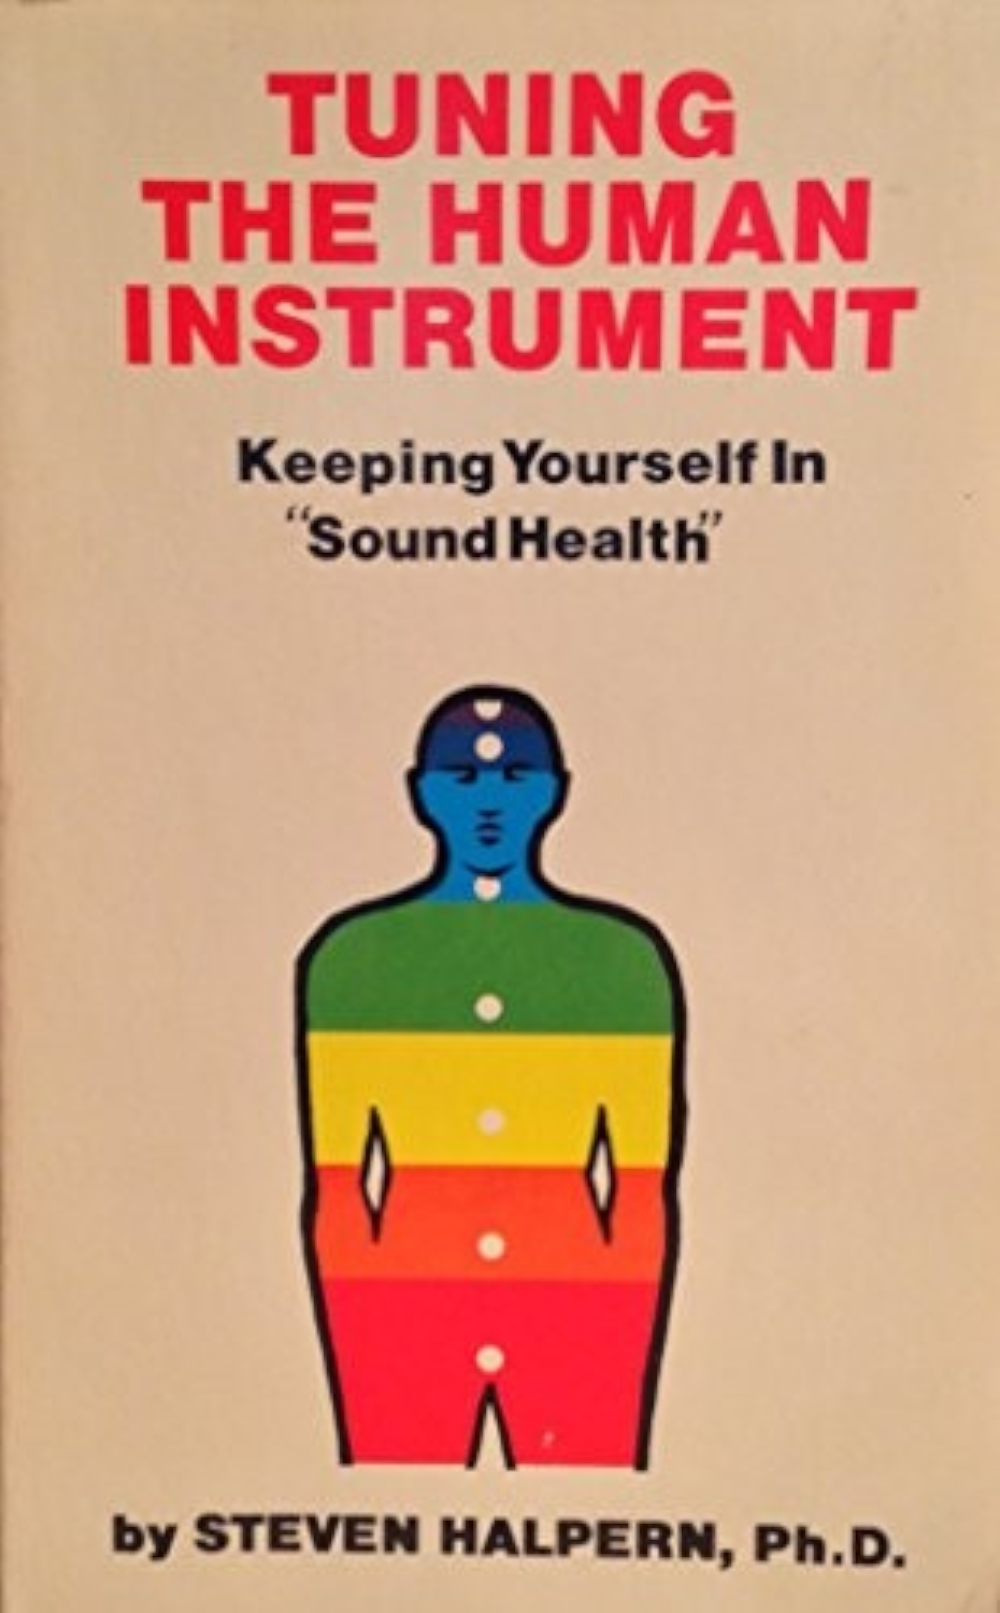 'Tuning the human Instrument: keeping yourself in Sound Health': Steven Halpern's first book was published in 1978.